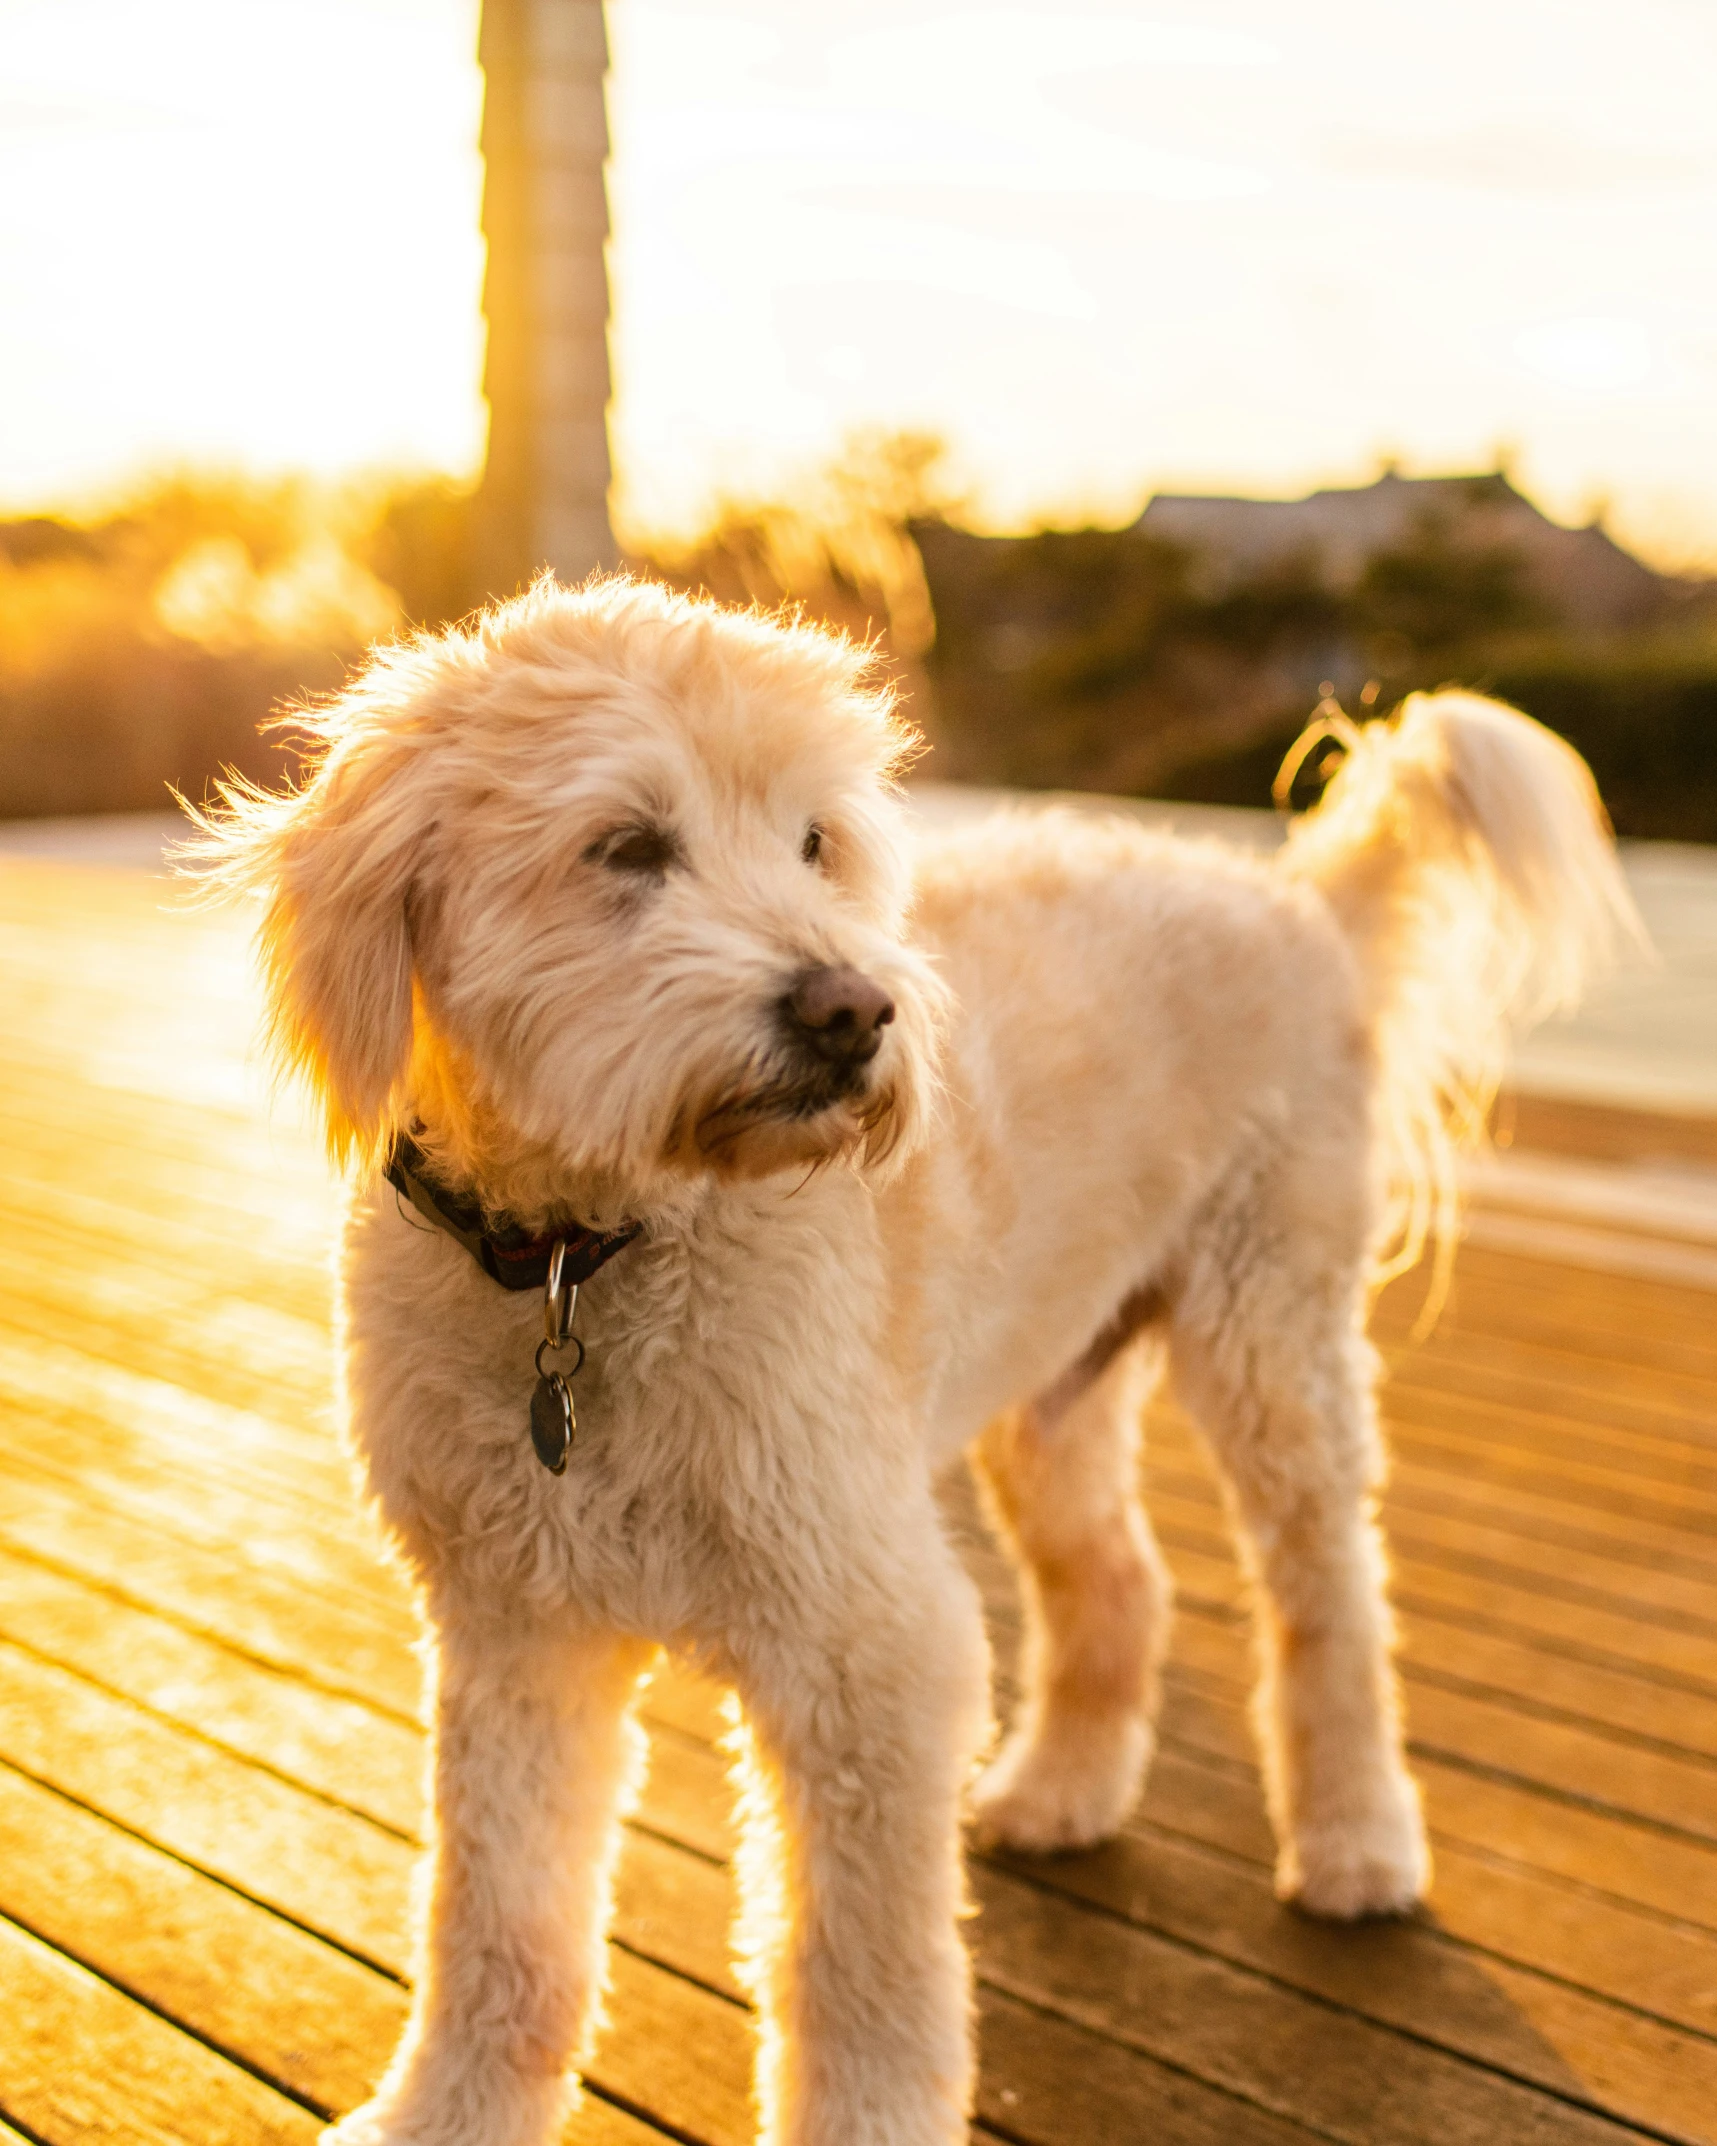 white dog standing on wooden deck in outdoor area